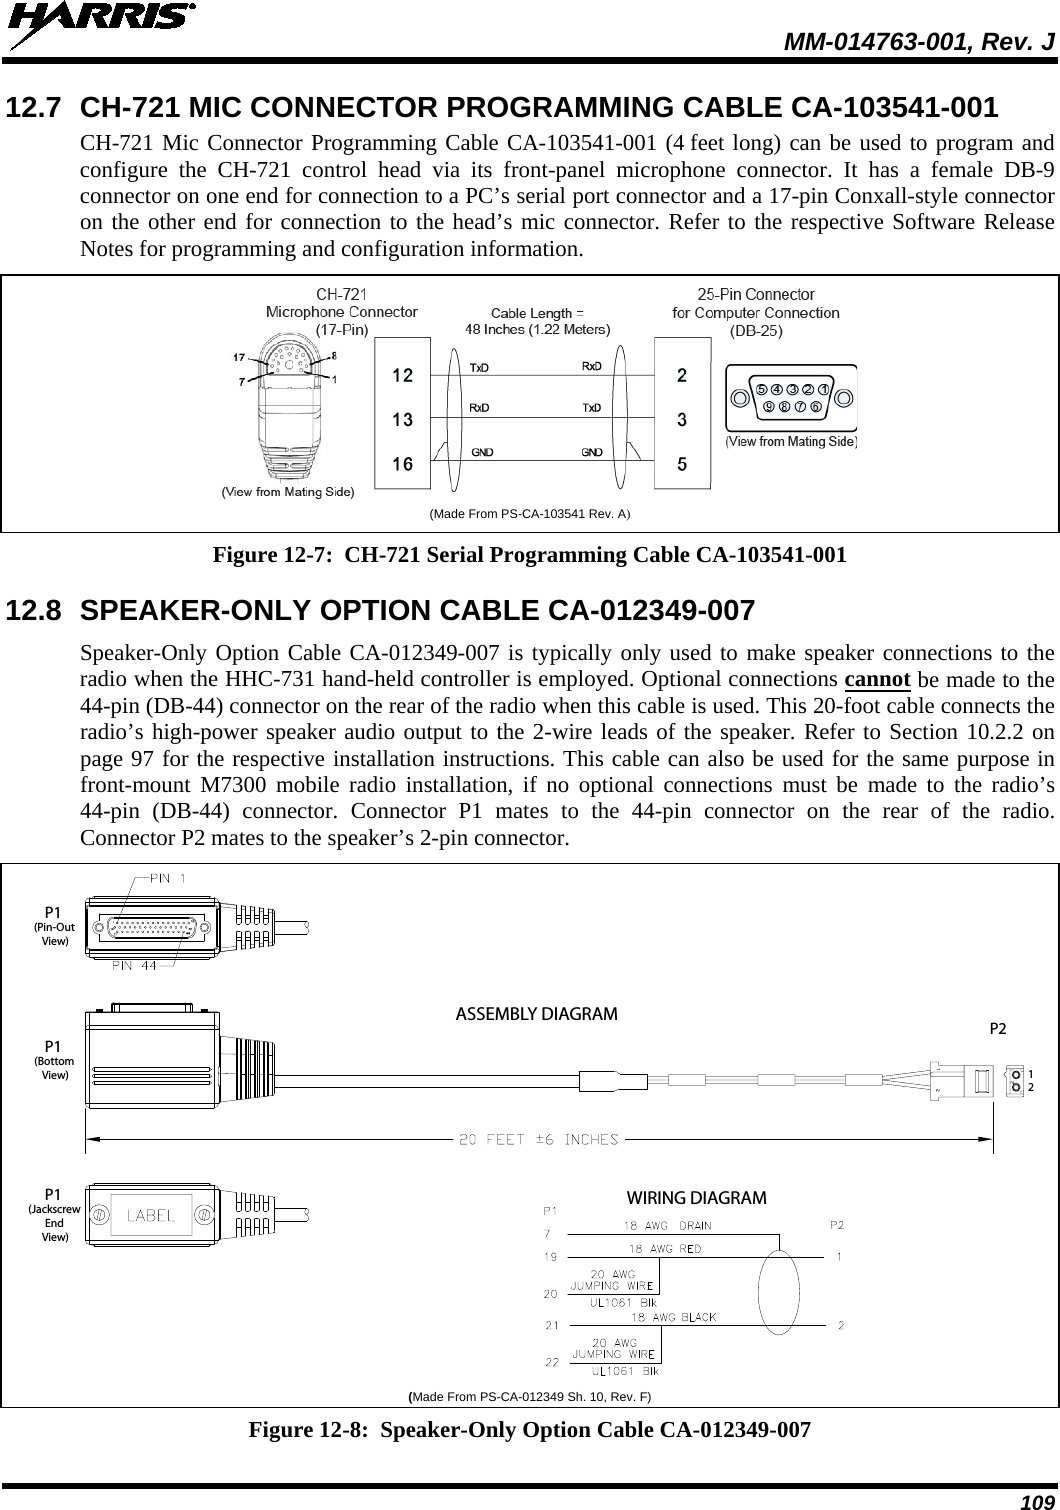  MM-014763-001, Rev. J 109 12.7 CH-721 MIC CONNECTOR PROGRAMMING CABLE CA-103541-001 CH-721 Mic Connector Programming Cable CA-103541-001 (4 feet long) can be used to program and configure the CH-721 control head via  its  front-panel  microphone connector. It has a female DB-9 connector on one end for connection to a PC’s serial port connector and a 17-pin Conxall-style connector on the other end for connection to the head’s mic connector. Refer to the respective Software Release Notes for programming and configuration information.  (Made From PS-CA-103541 Rev. A) Figure 12-7:  CH-721 Serial Programming Cable CA-103541-001  12.8 SPEAKER-ONLY OPTION CABLE CA-012349-007 Speaker-Only Option Cable CA-012349-007 is typically only used to make speaker connections to the radio when the HHC-731 hand-held controller is employed. Optional connections cannot be made to the 44-pin (DB-44) connector on the rear of the radio when this cable is used. This 20-foot cable connects the radio’s high-power speaker audio output to the 2-wire leads of the speaker. Refer to Section 10.2.2 on page 97 for the respective installation instructions. This cable can also be used for the same purpose in front-mount M7300 mobile radio installation, if no optional connections must be made to the radio’s 44-pin (DB-44) connector.  Connector P1 mates to the 44-pin connector on the rear of the radio. Connector P2 mates to the speaker’s 2-pin connector.  (Made From PS-CA-012349 Sh. 10, Rev. F) Figure 12-8:  Speaker-Only Option Cable CA-012349-007 P1ASSEMBLY DIAGRAMWIRING DIAGRAMP212(Pin-OutView)P1(BottomView)P1(JackscrewEndView)